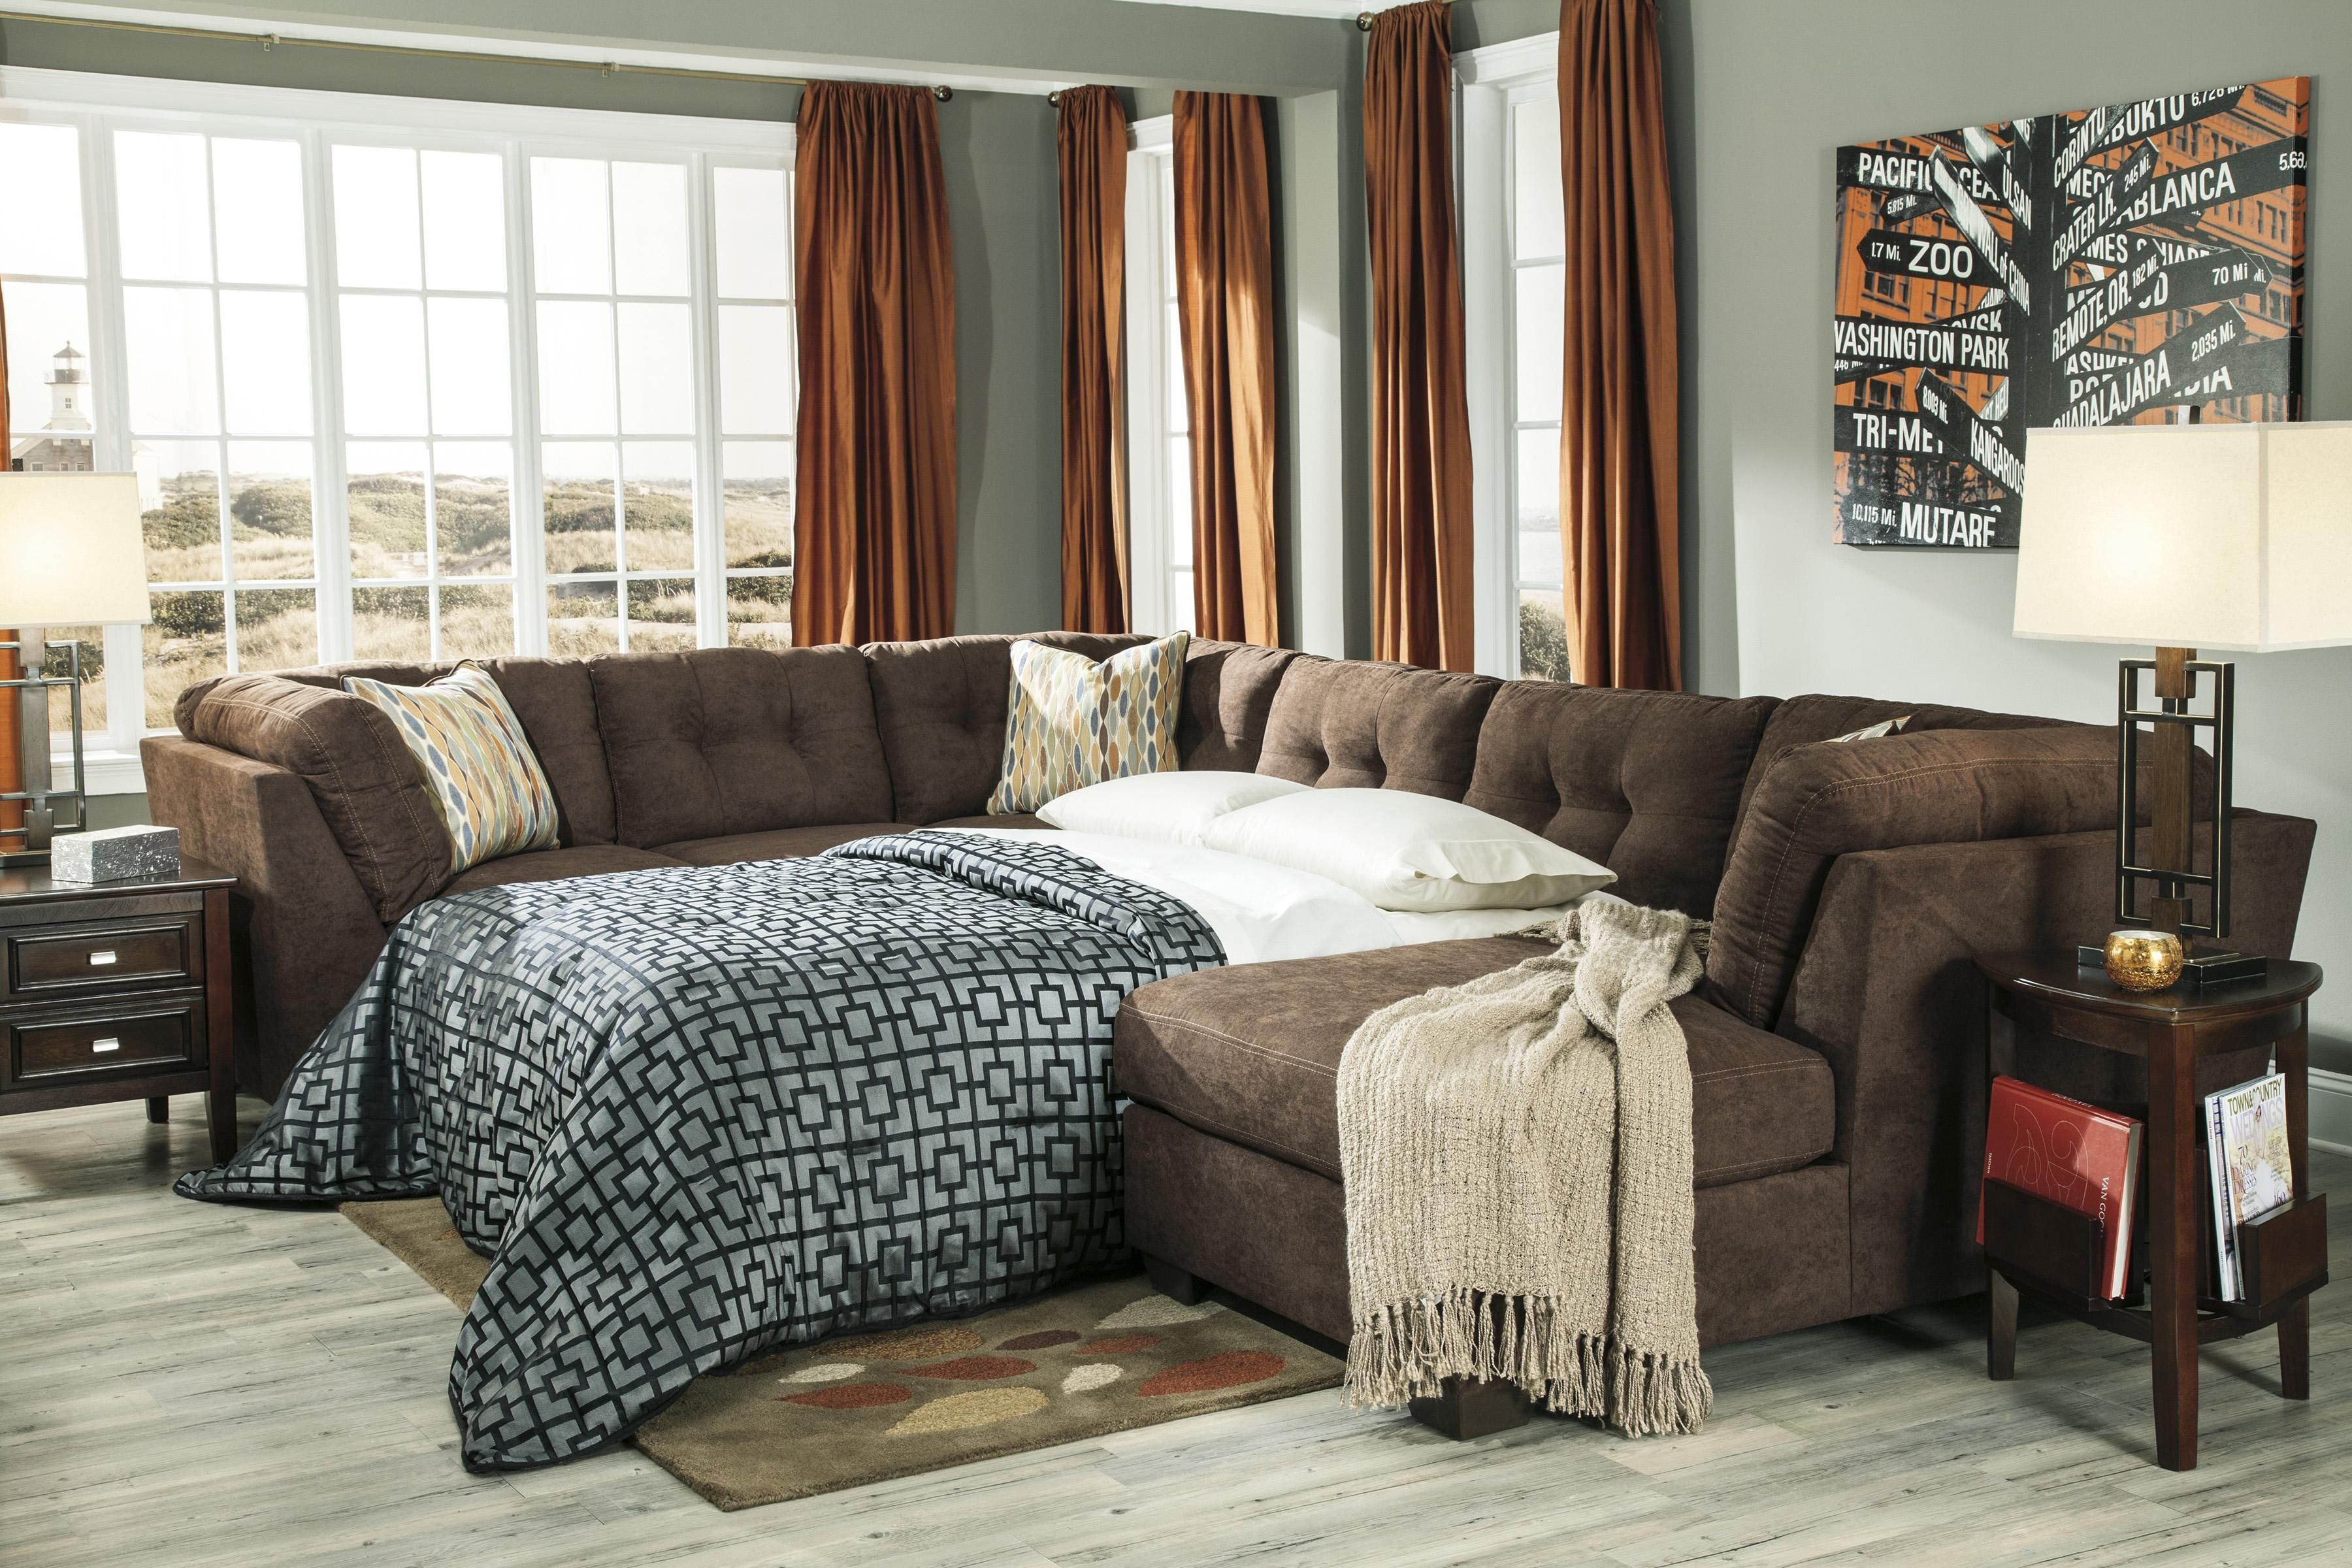 Furniture Wondrous Alluring Sectional With Sleeper For Home Inside 3 Piece Sectional Sleeper Sofa (View 6 of 15)